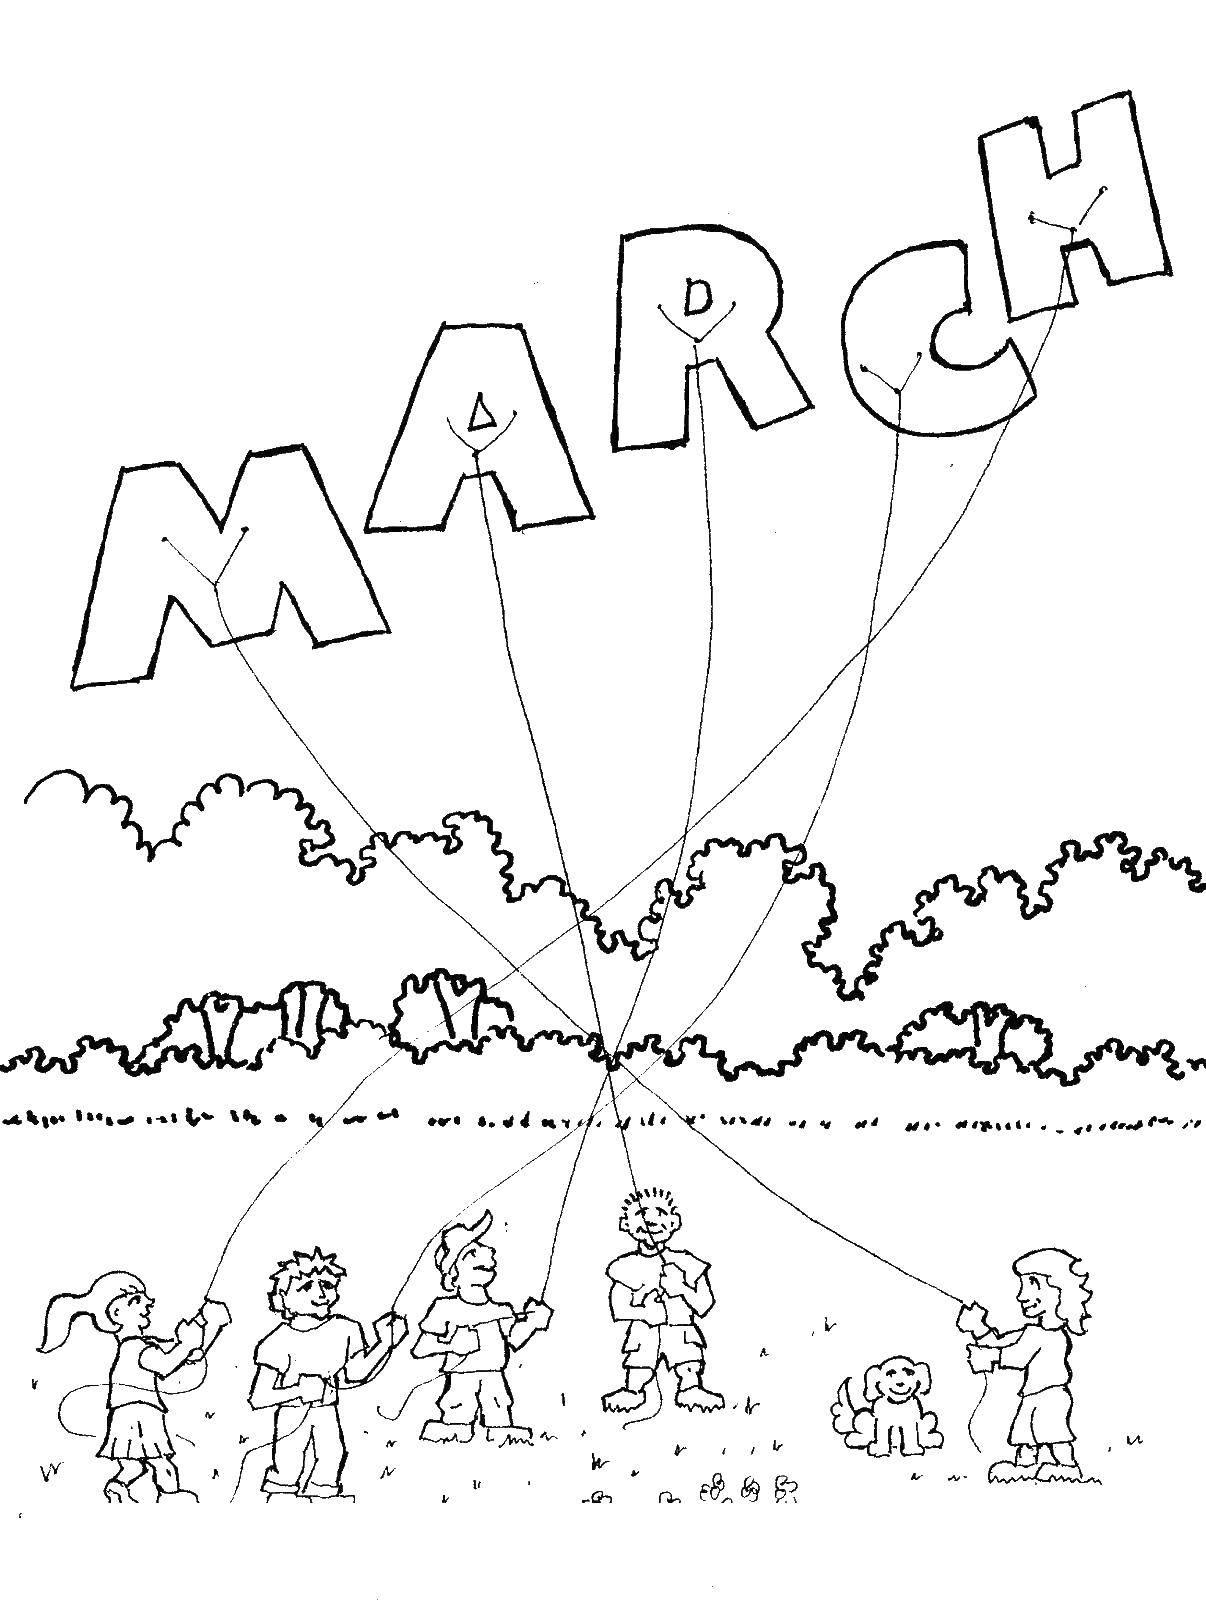 Coloring March. Category Calendar. Tags:  March.